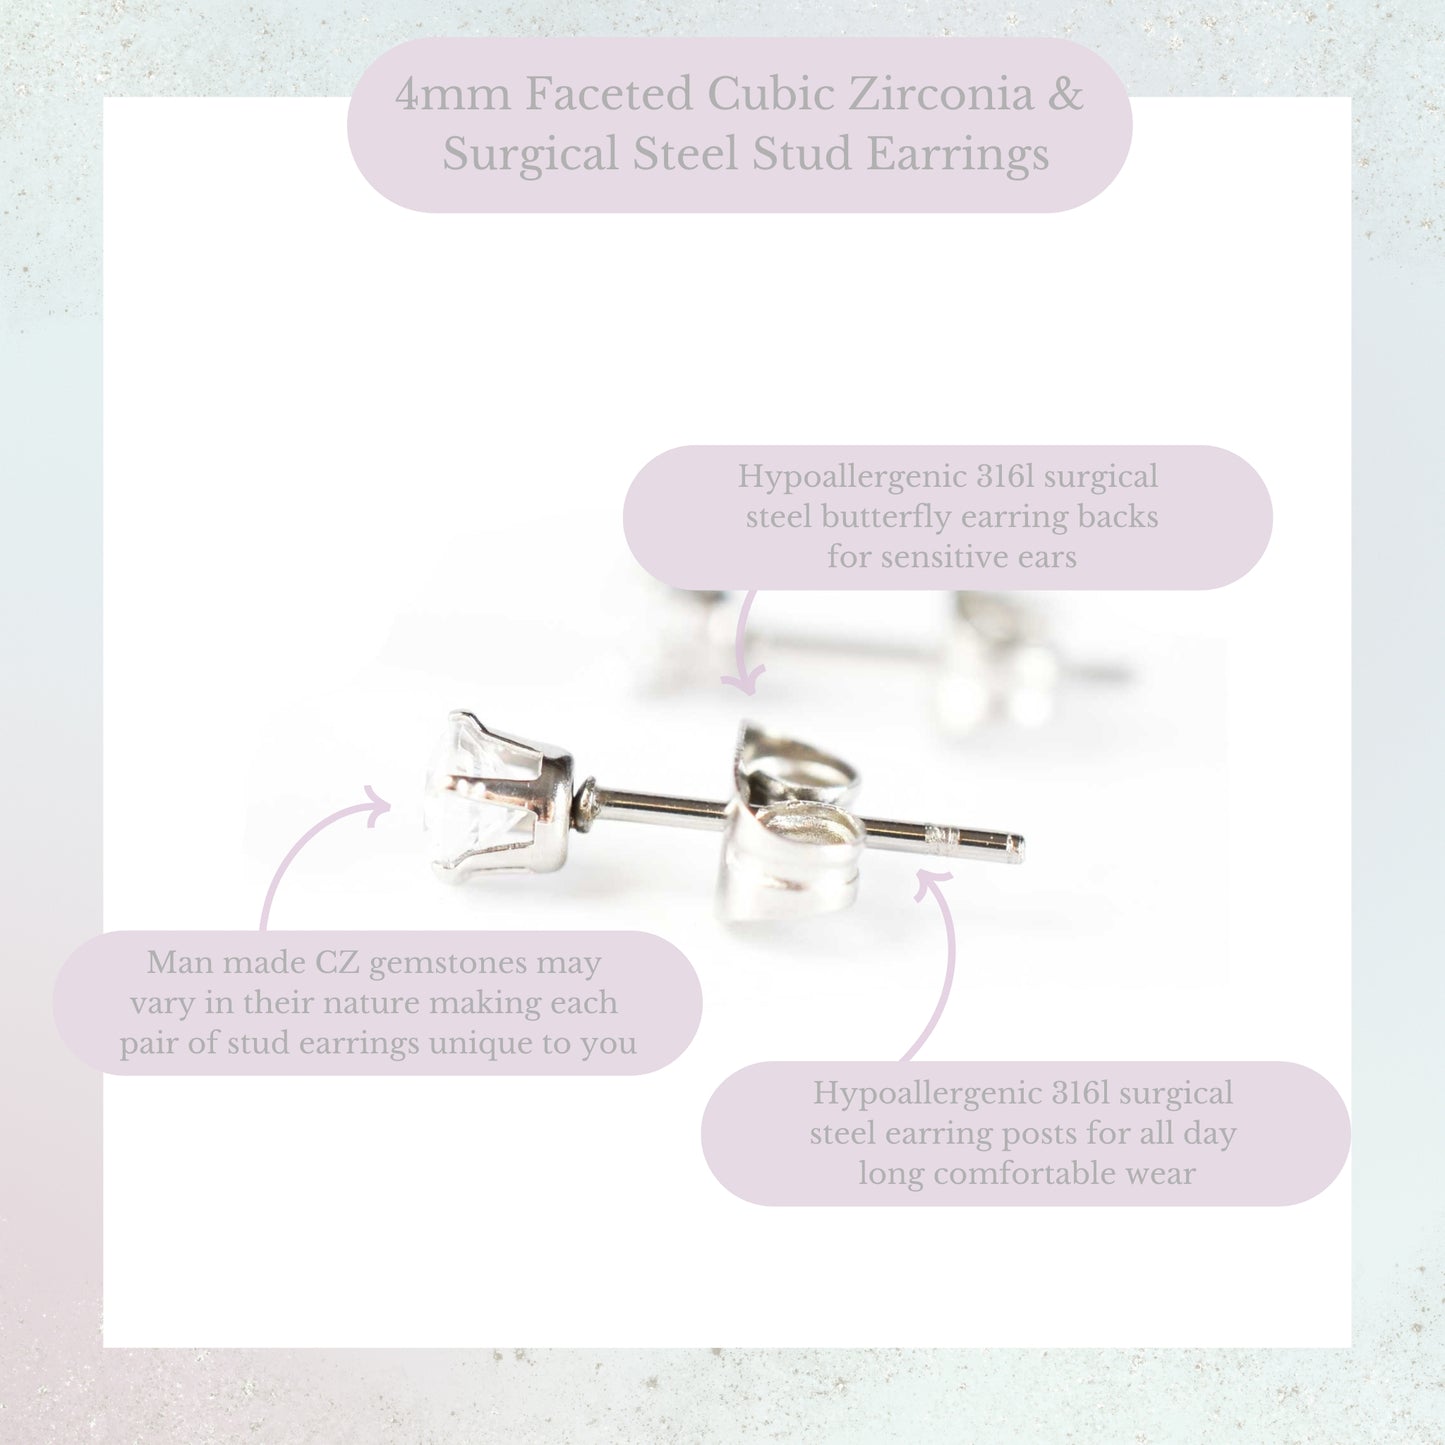 Product information graphic for 4mm faceted Cubic Zirconia stud earrings